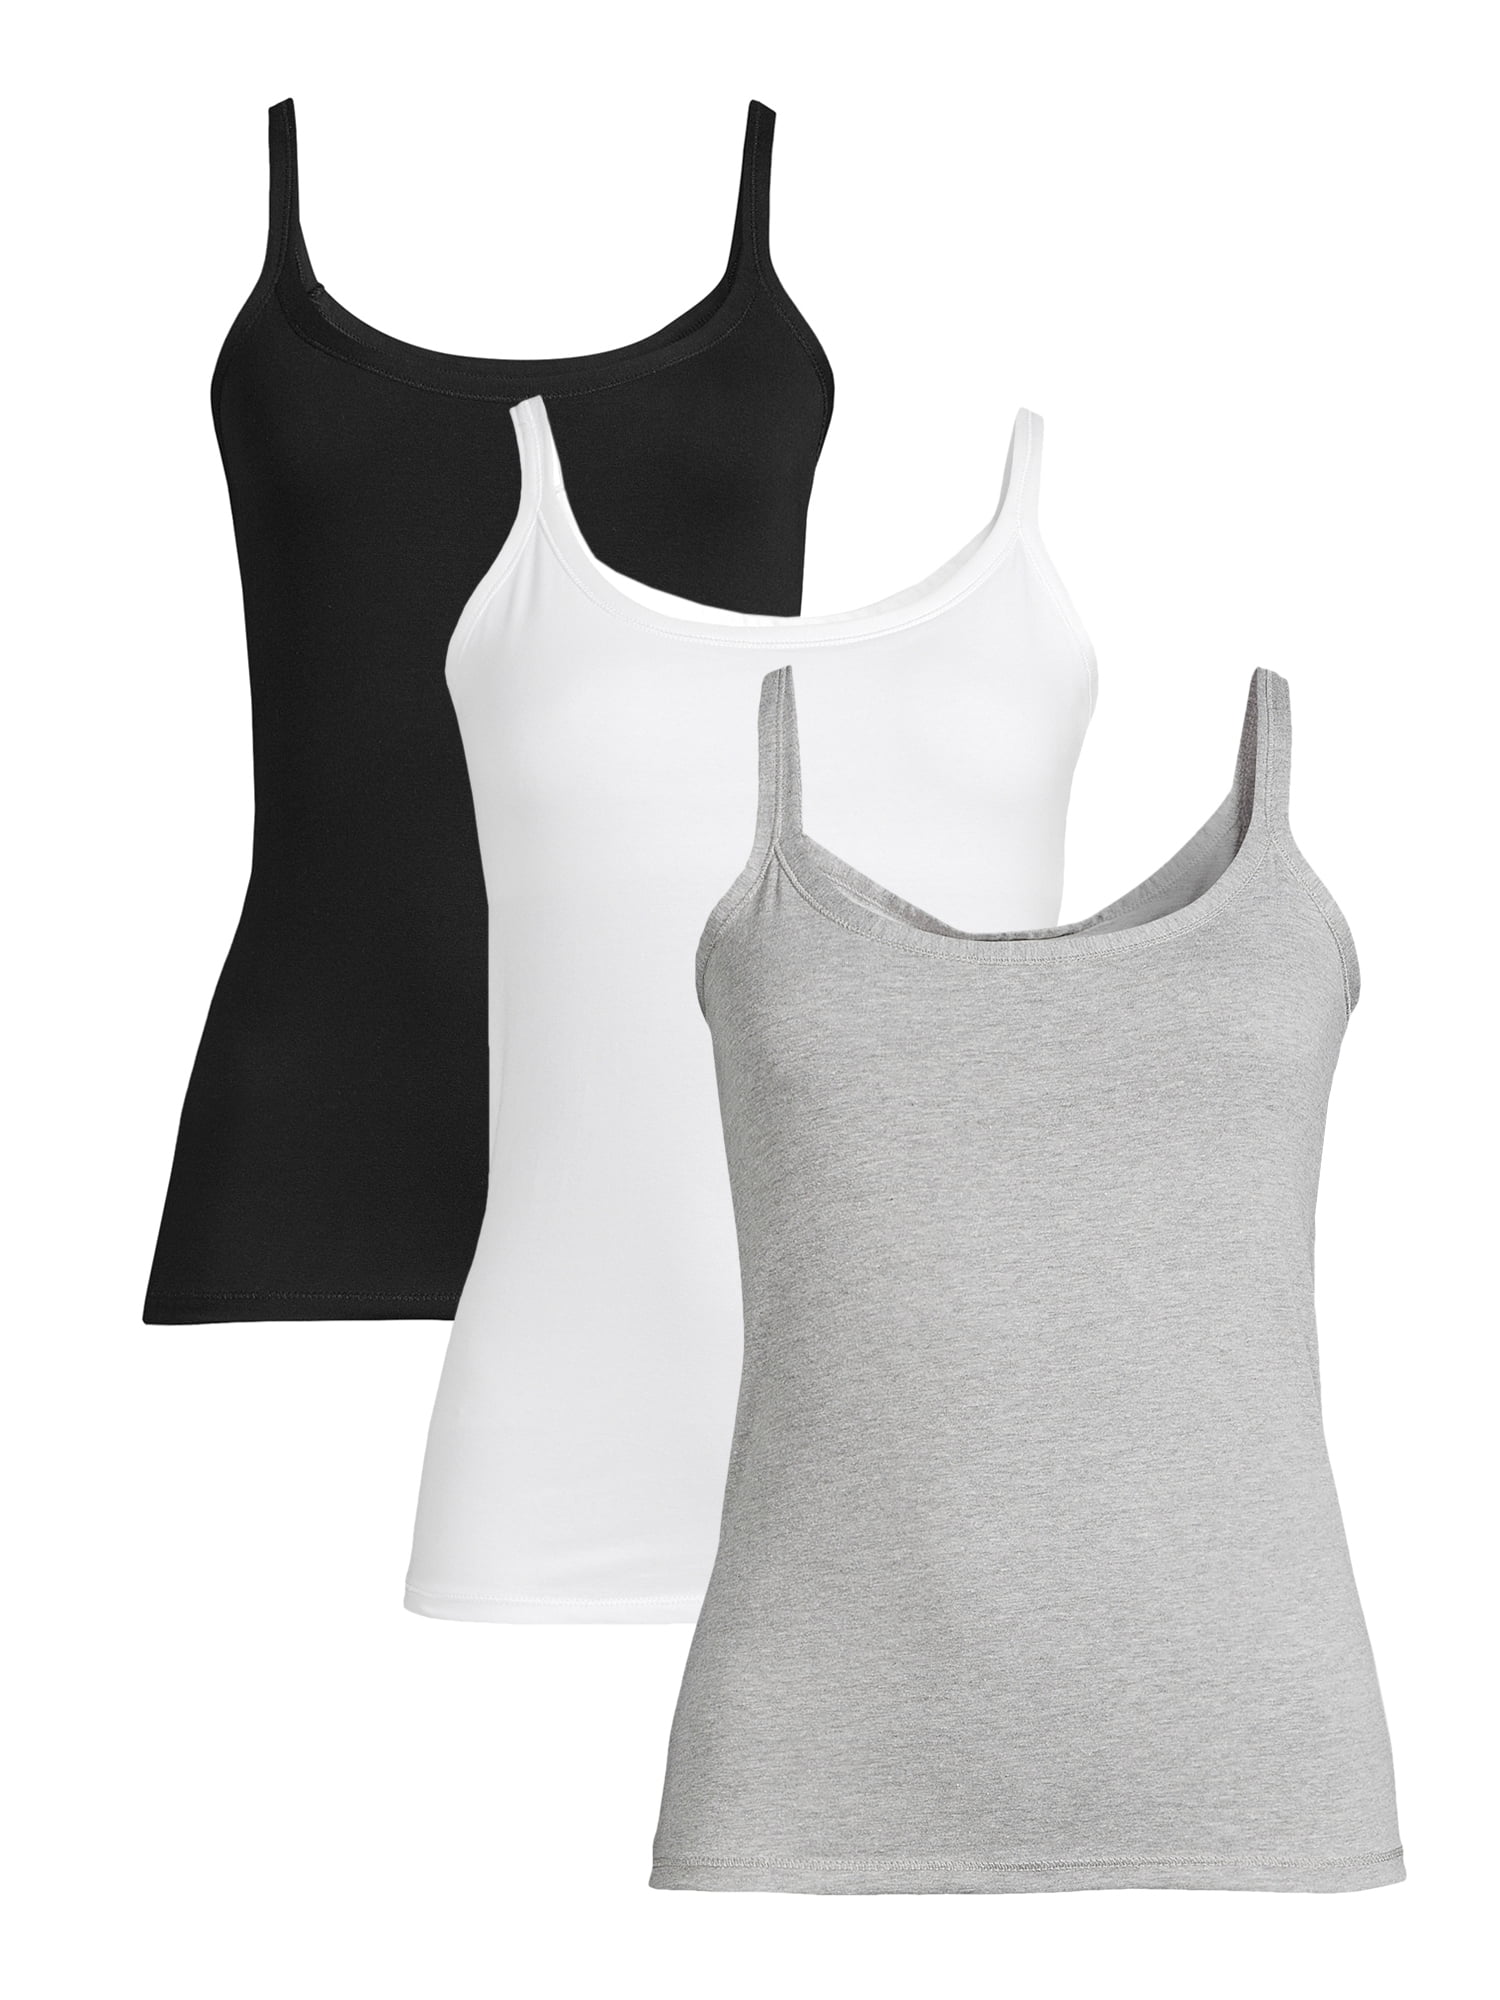 Cami bra top • Compare (200+ products) see price now »